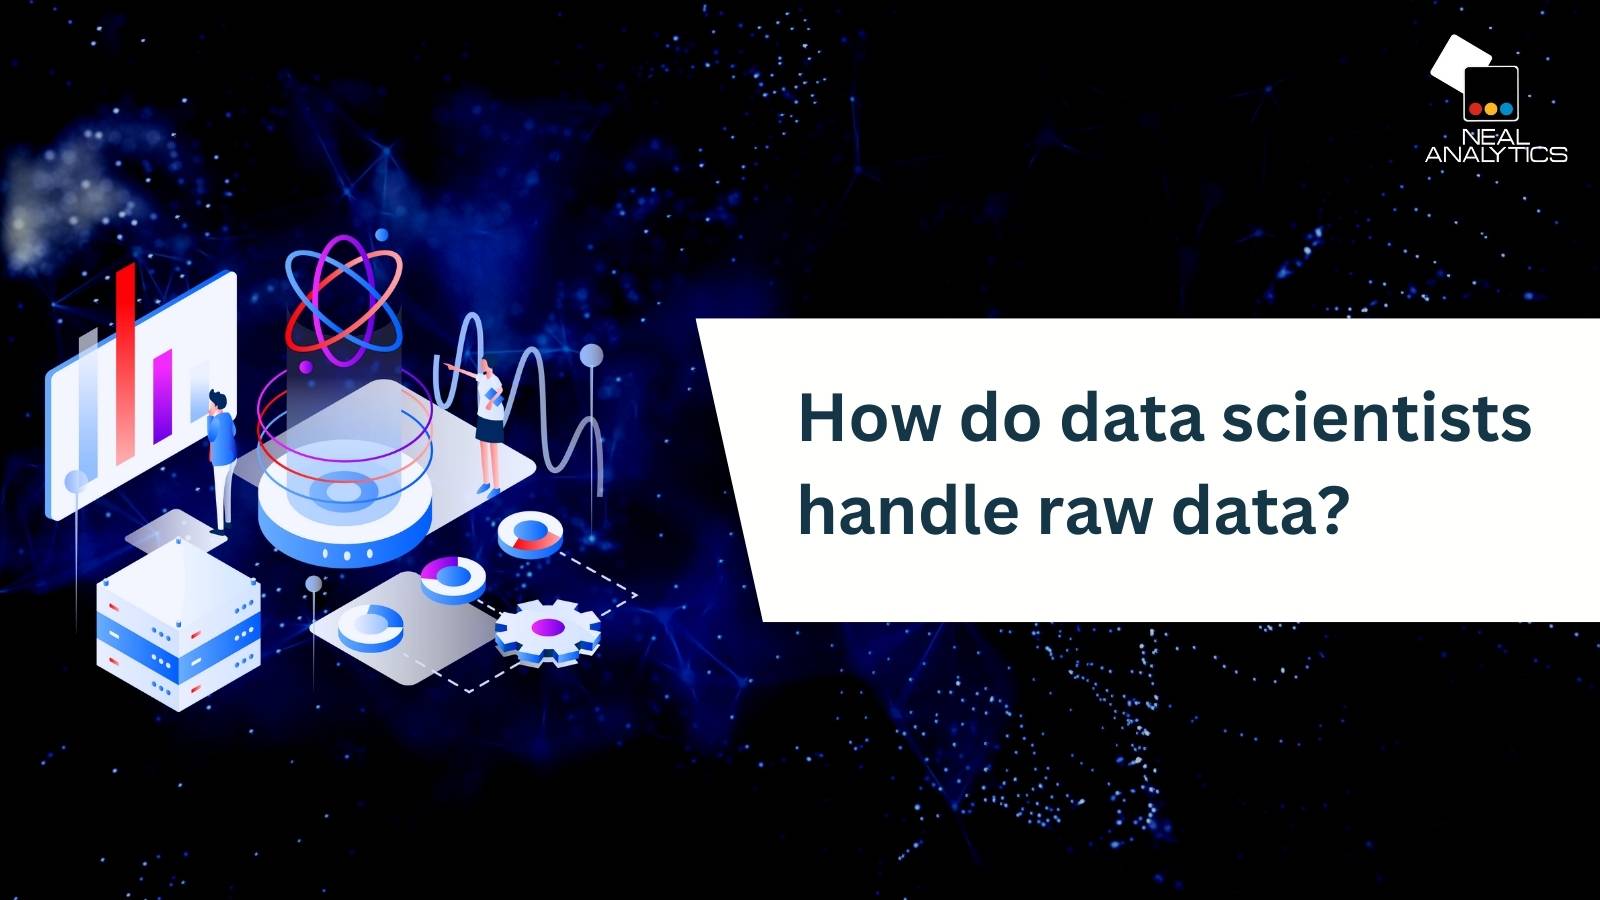 Raw data for data science